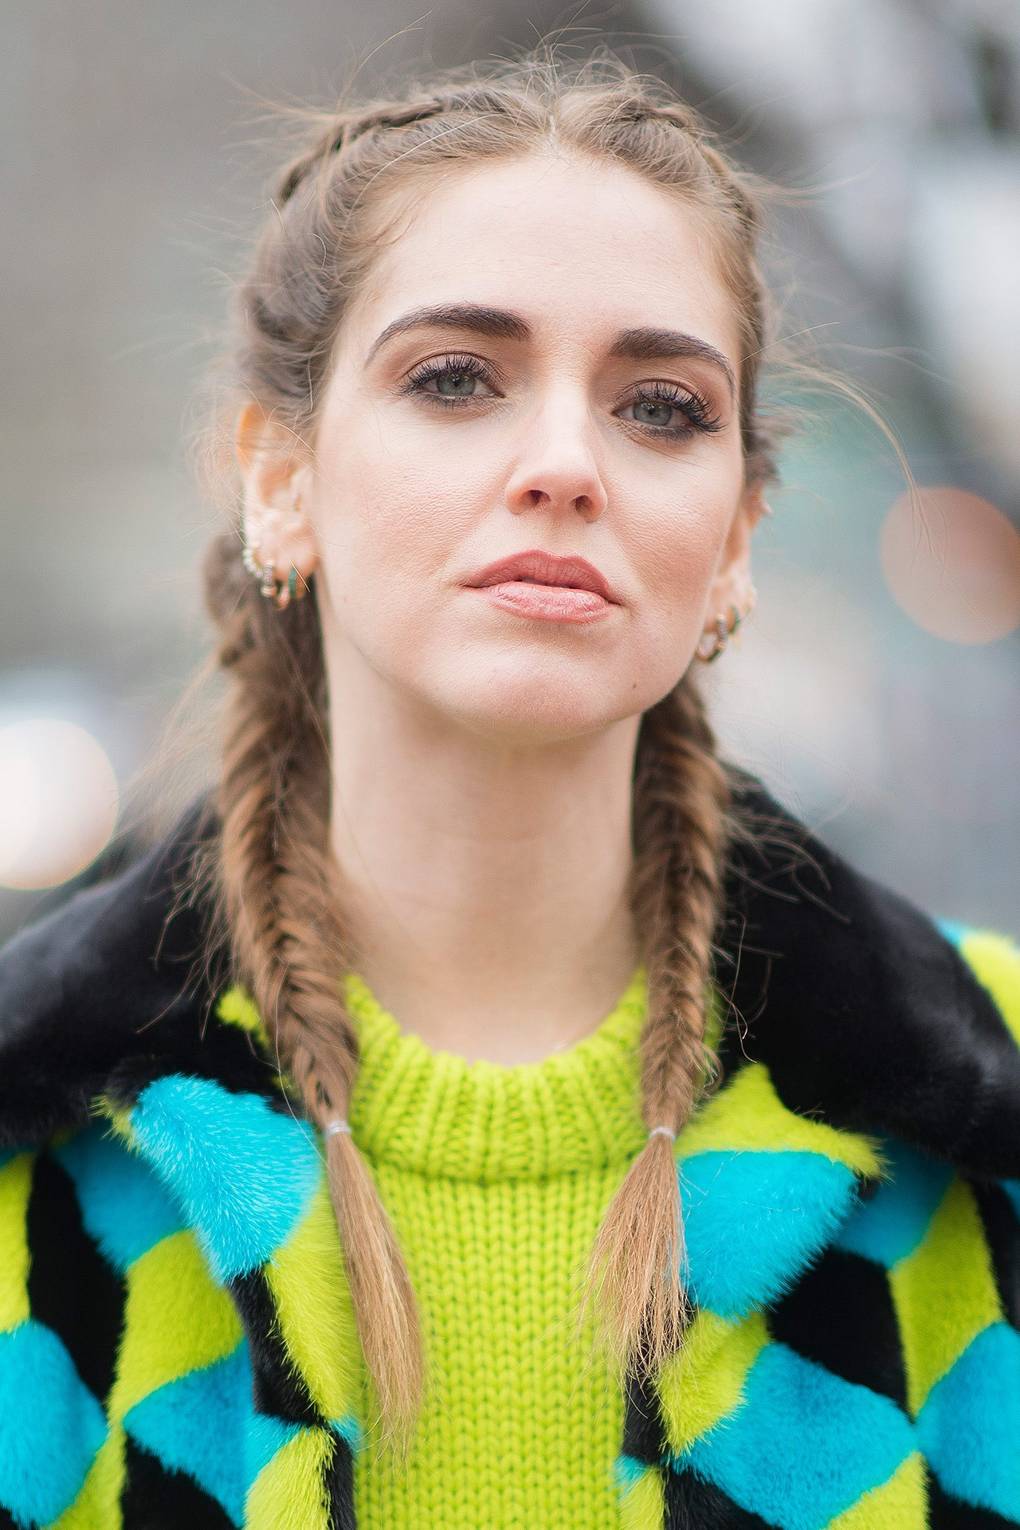 Pigtail plaits boxer braid hair style - celebrity pictures | Glamour UK